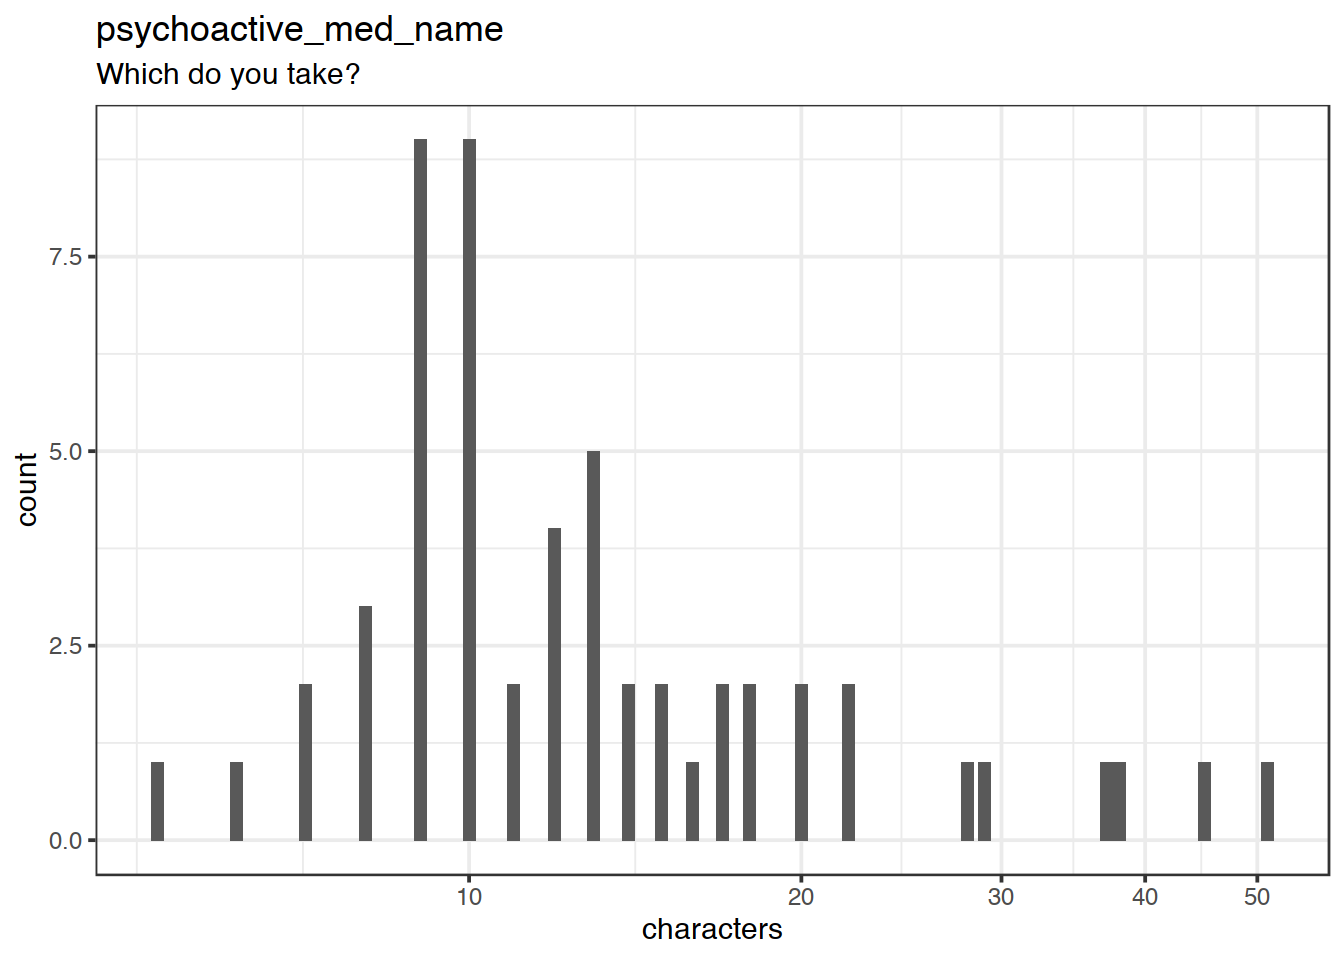 Distribution of values for psychoactive_med_name